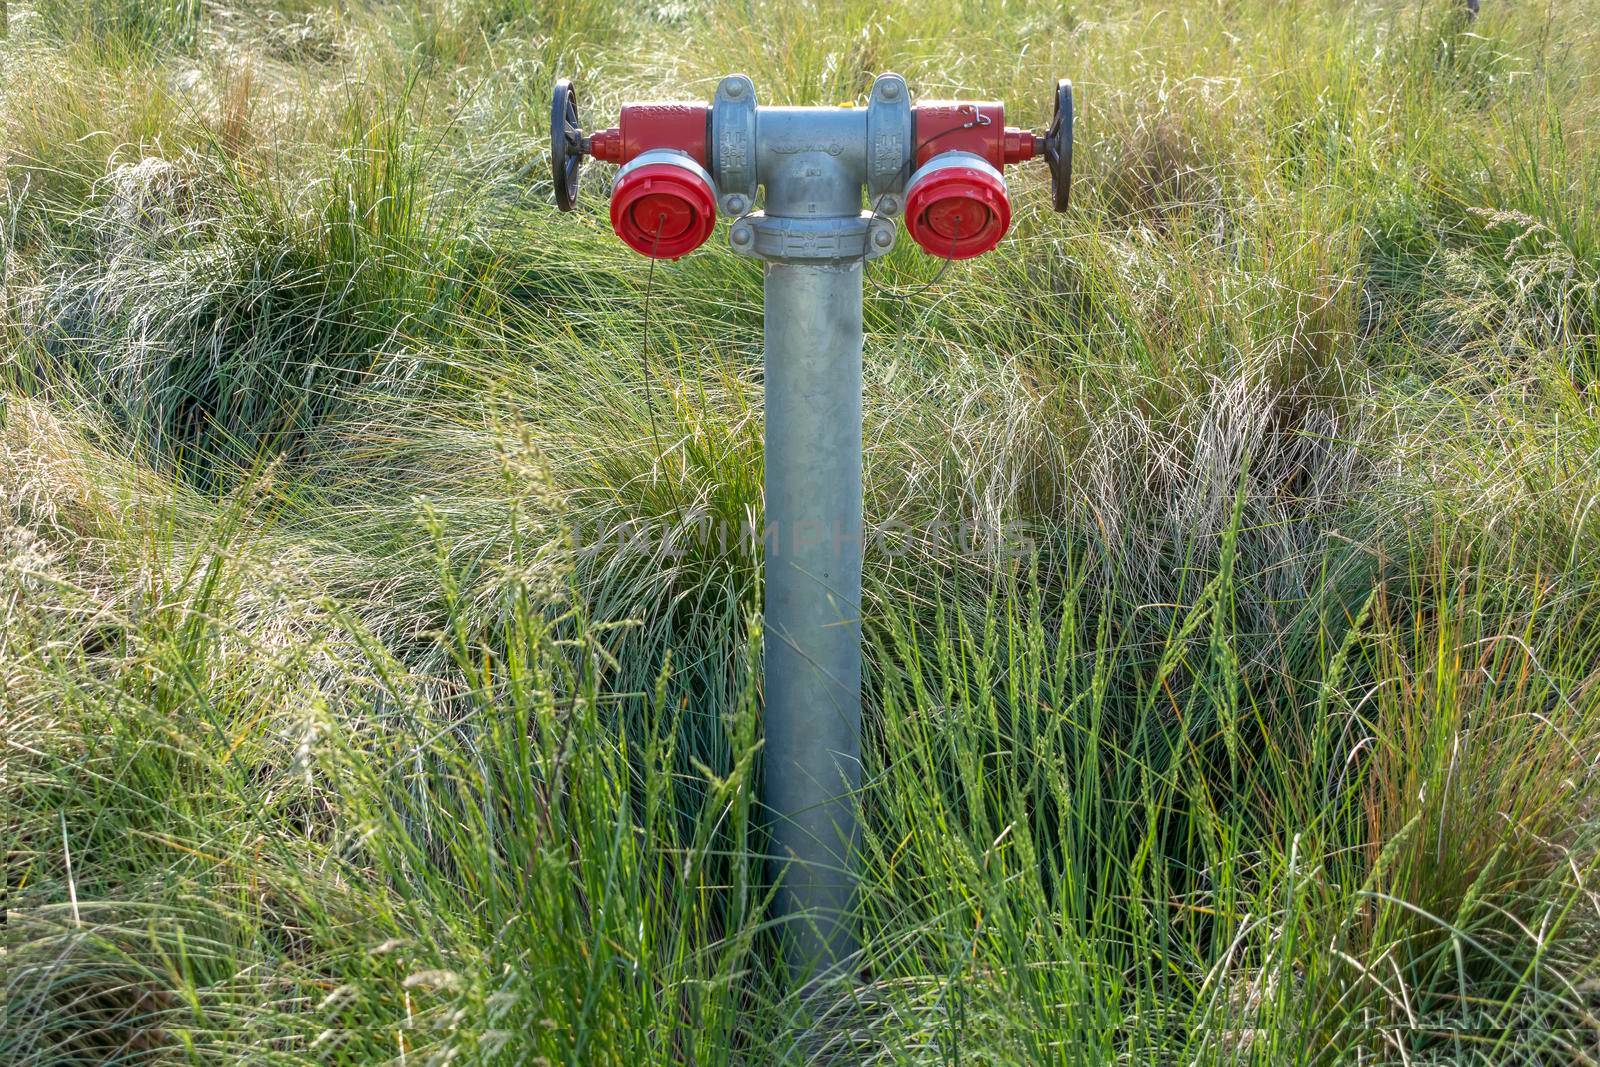 An industrial fire hydrant outdoors in regional Australia by WittkePhotos